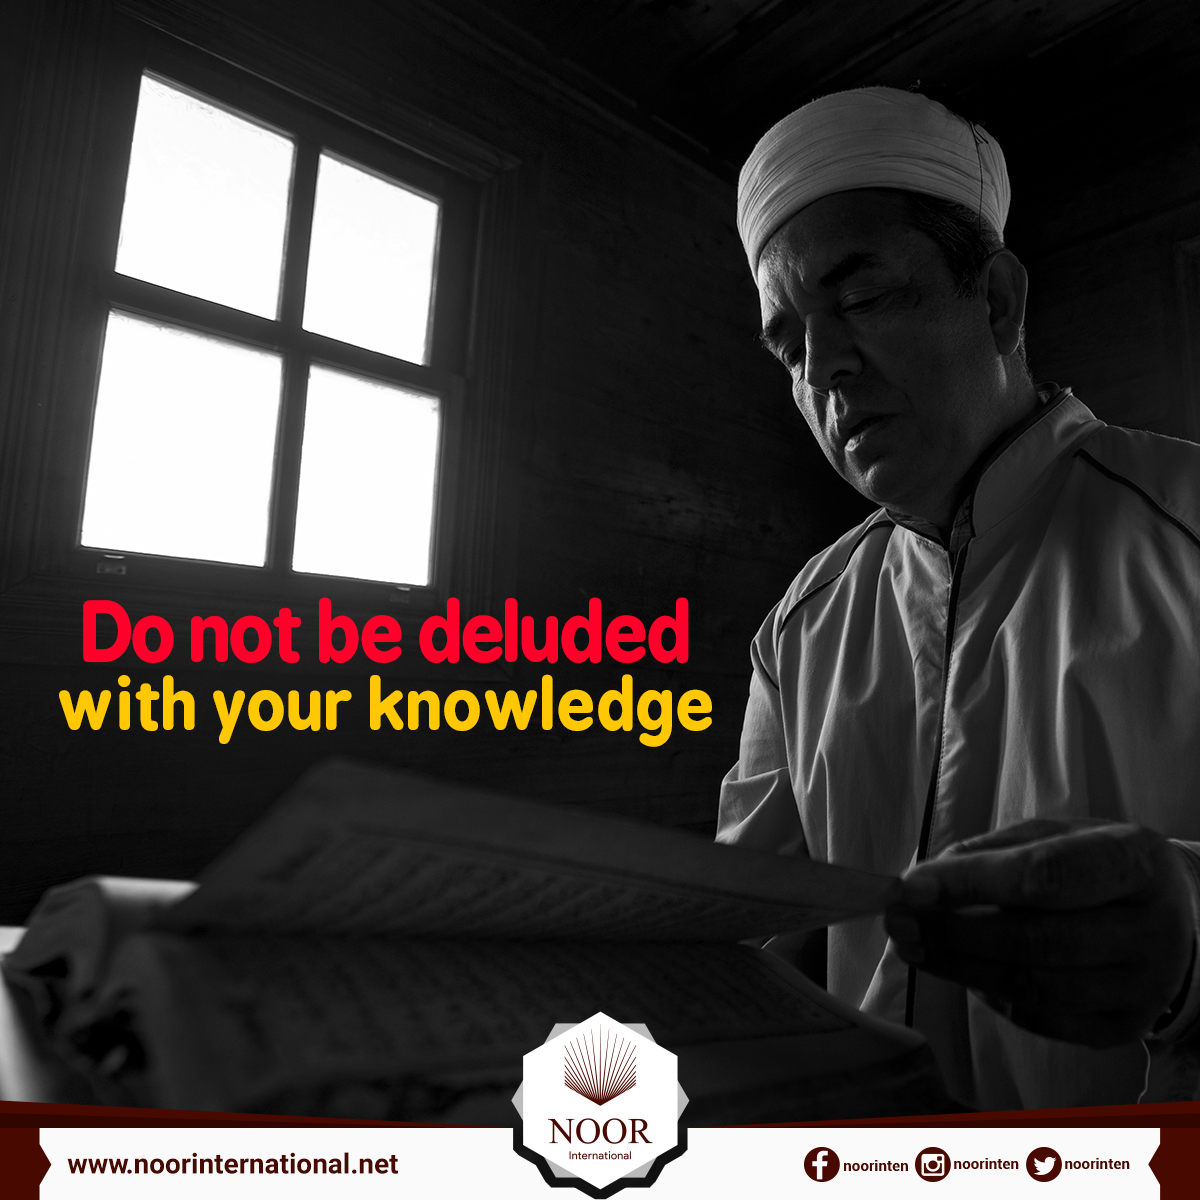 Do not be deluded with your knowledge